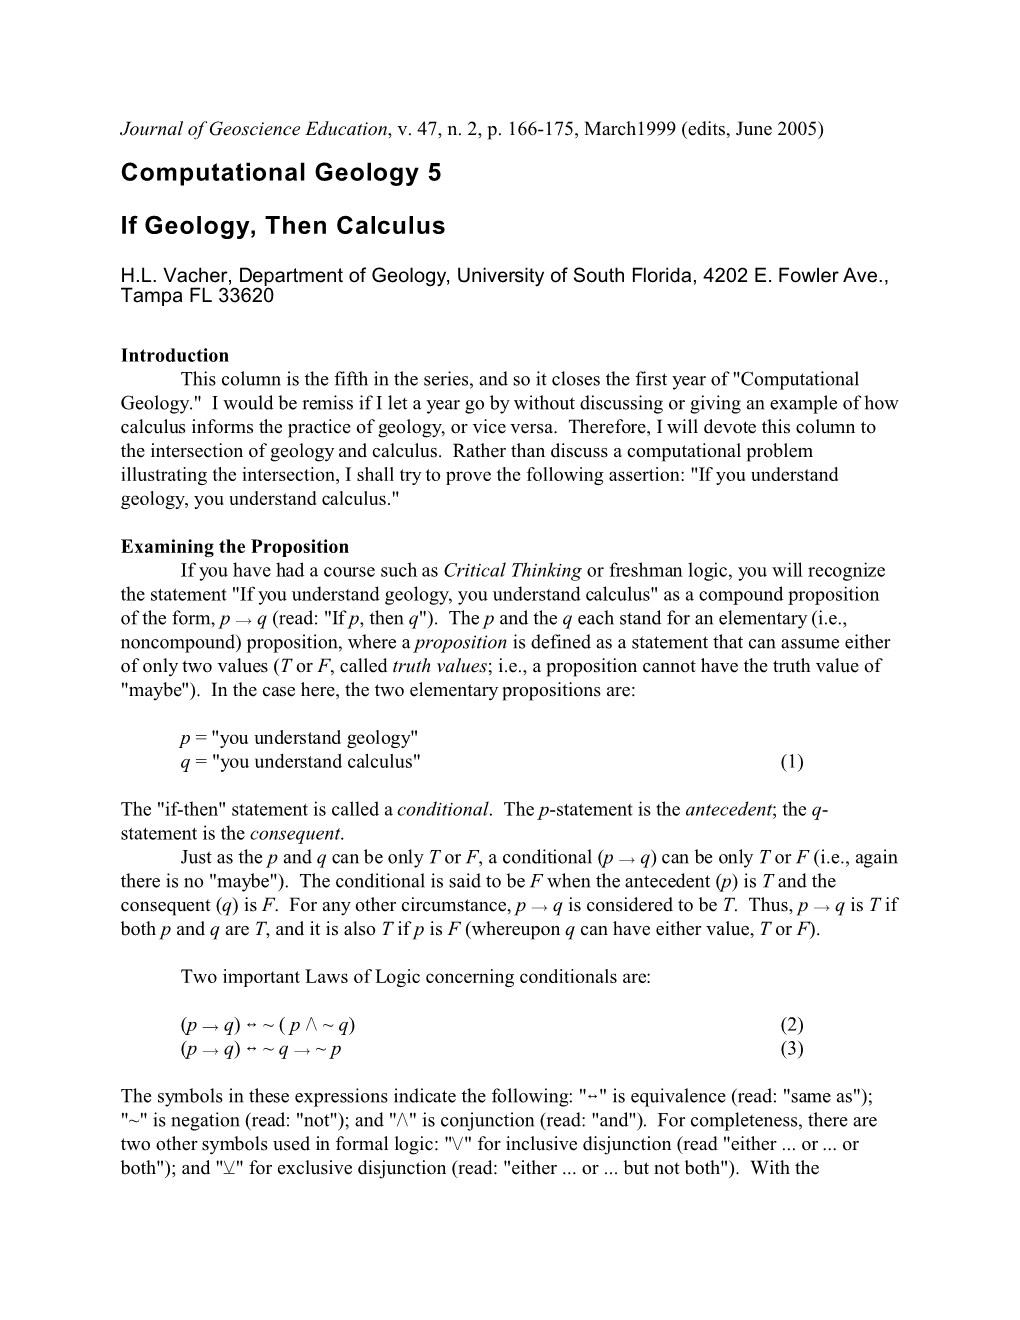 Computational Geology 5 If Geology, Then Calculus